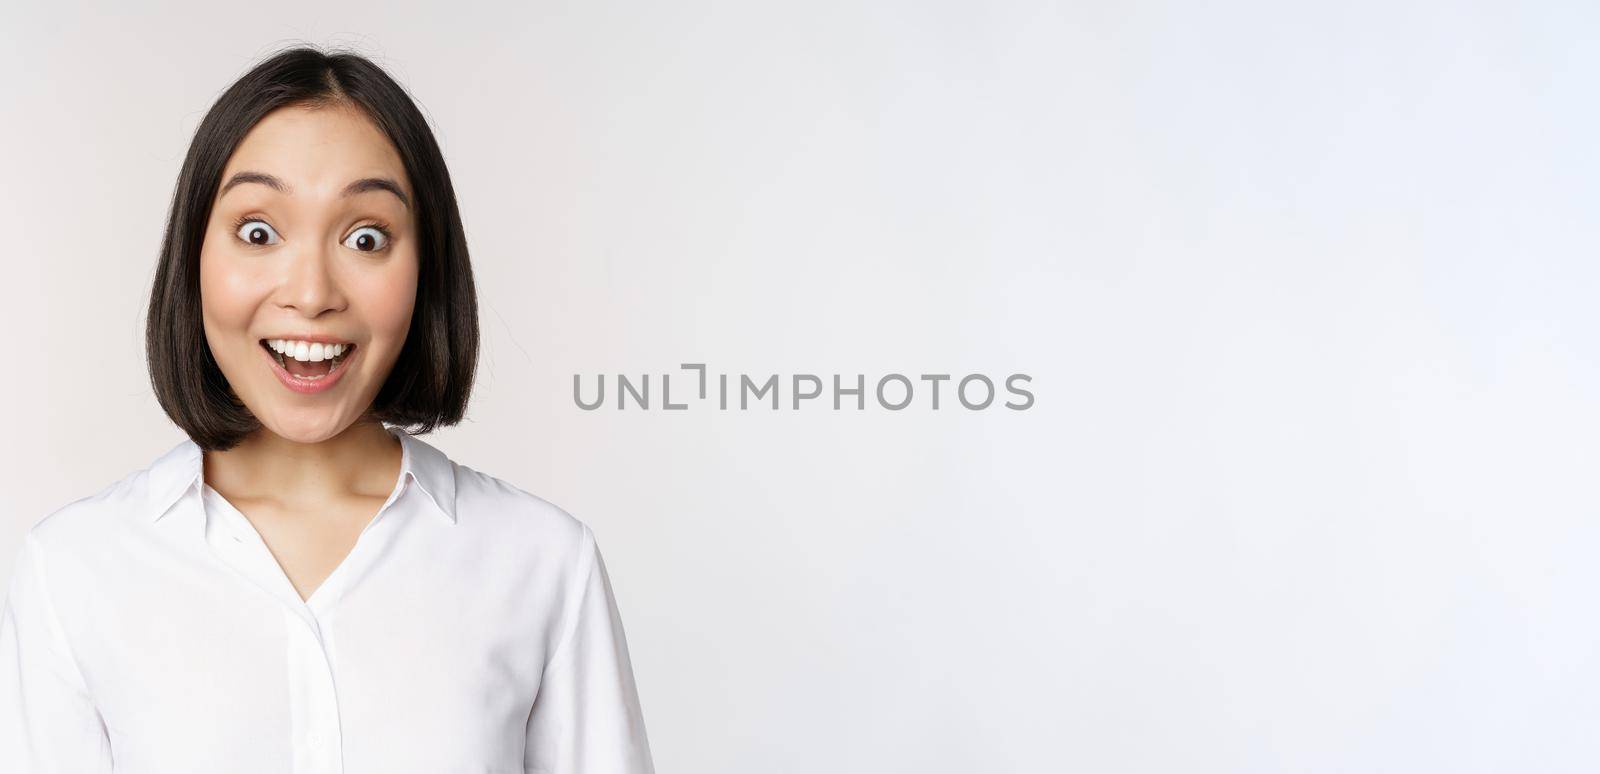 Image of korean woman looking surprised and happy at camera, standing over white background. Copy space